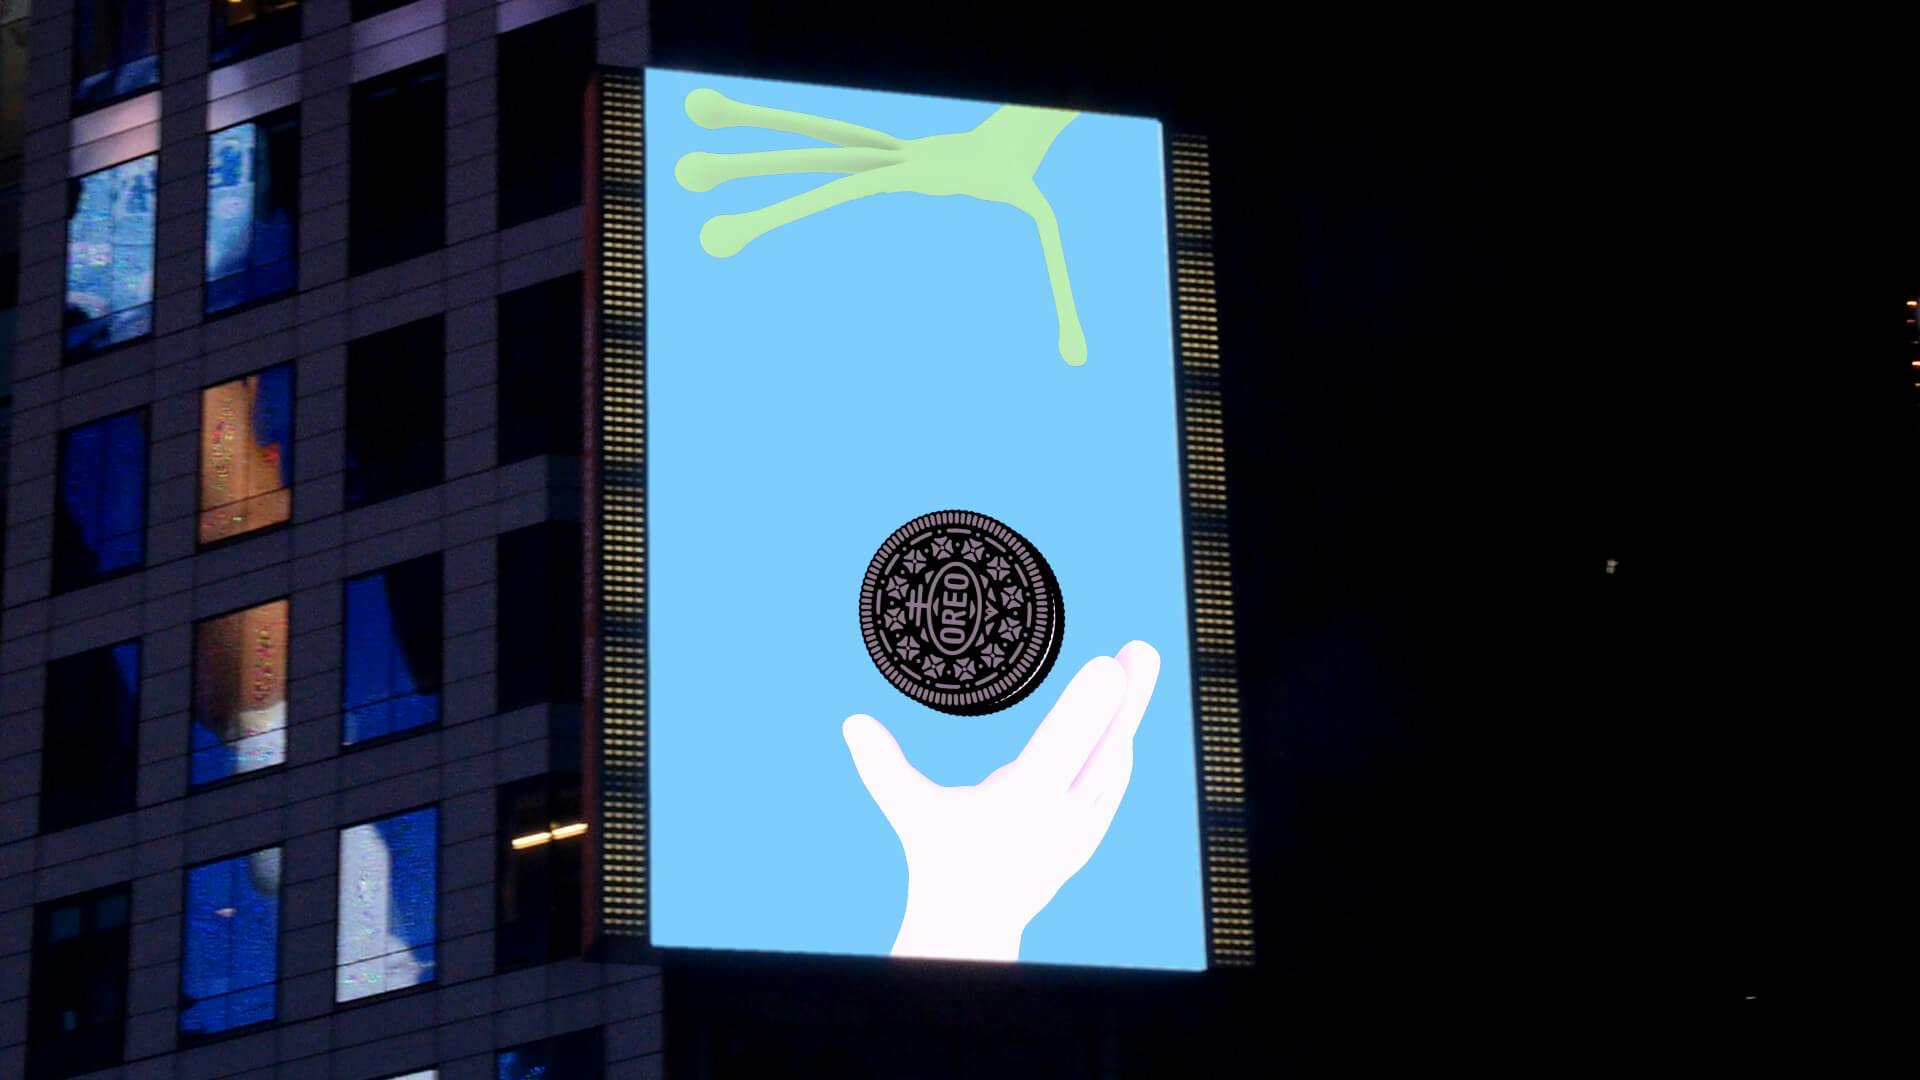 Creative Bloq says Oreo is a “must see”